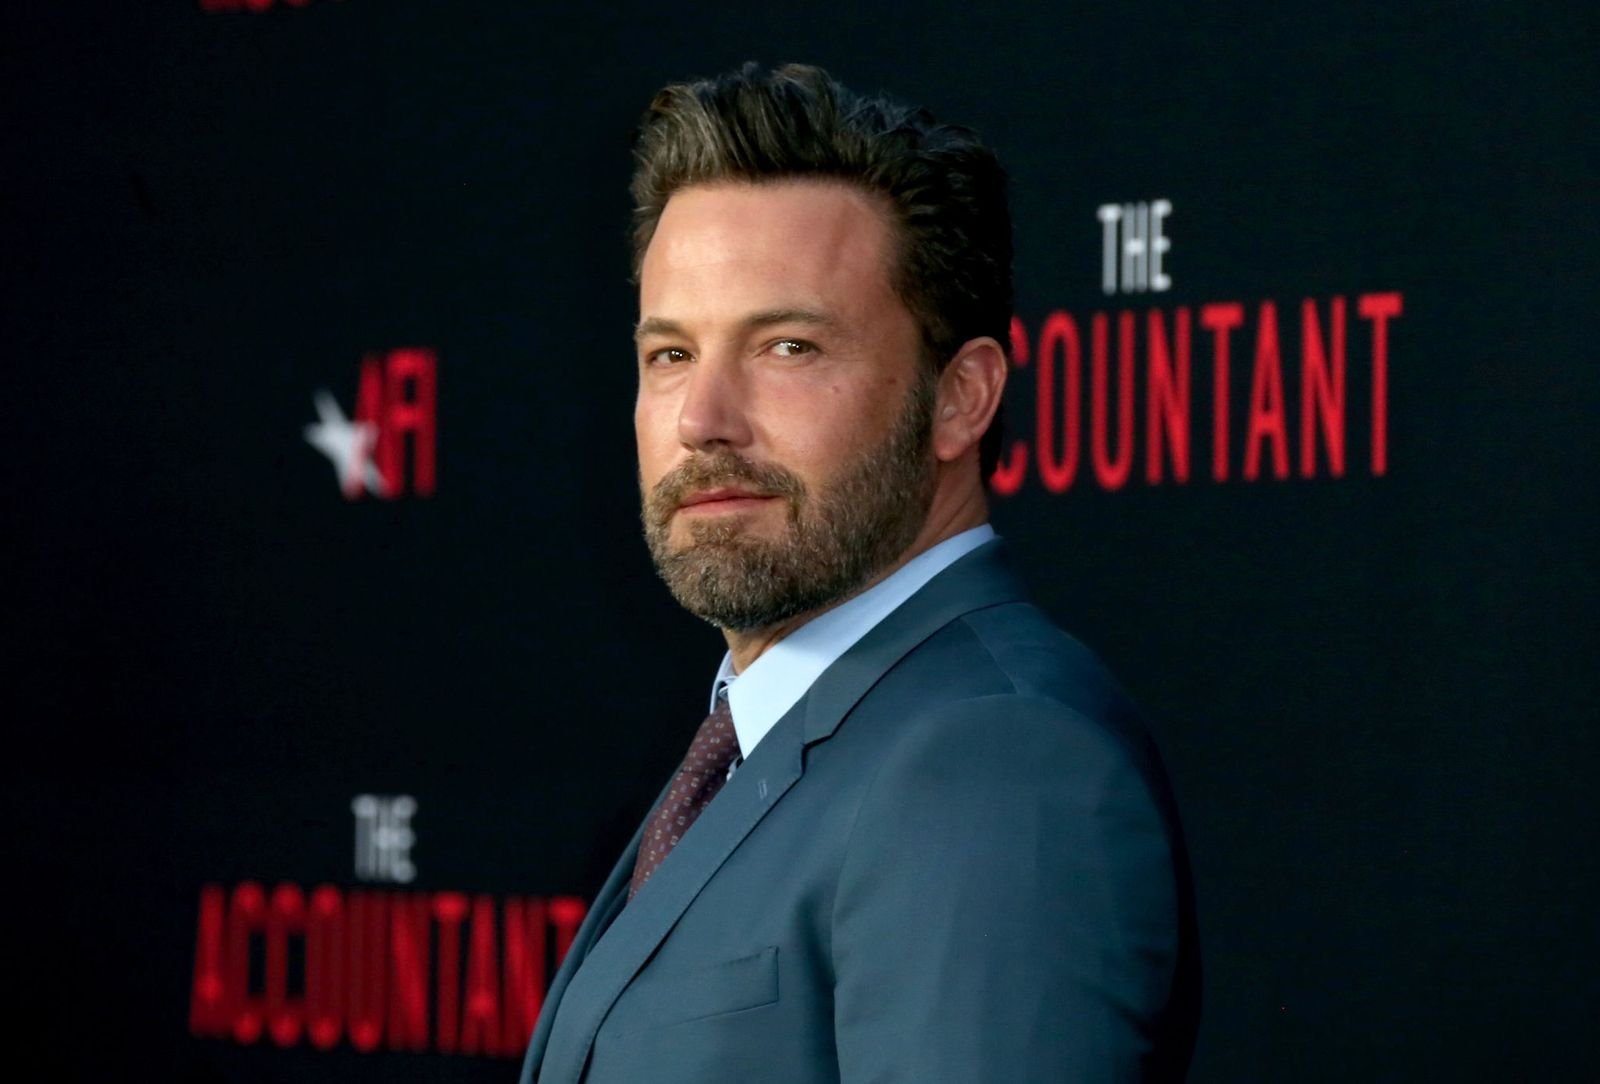 Ben Affleck at the premiere of "The Accountant" at TCL Chinese Theatre on October 10, 2016, in Hollywood, California | Photo: Frederick M. Brown/Getty Images